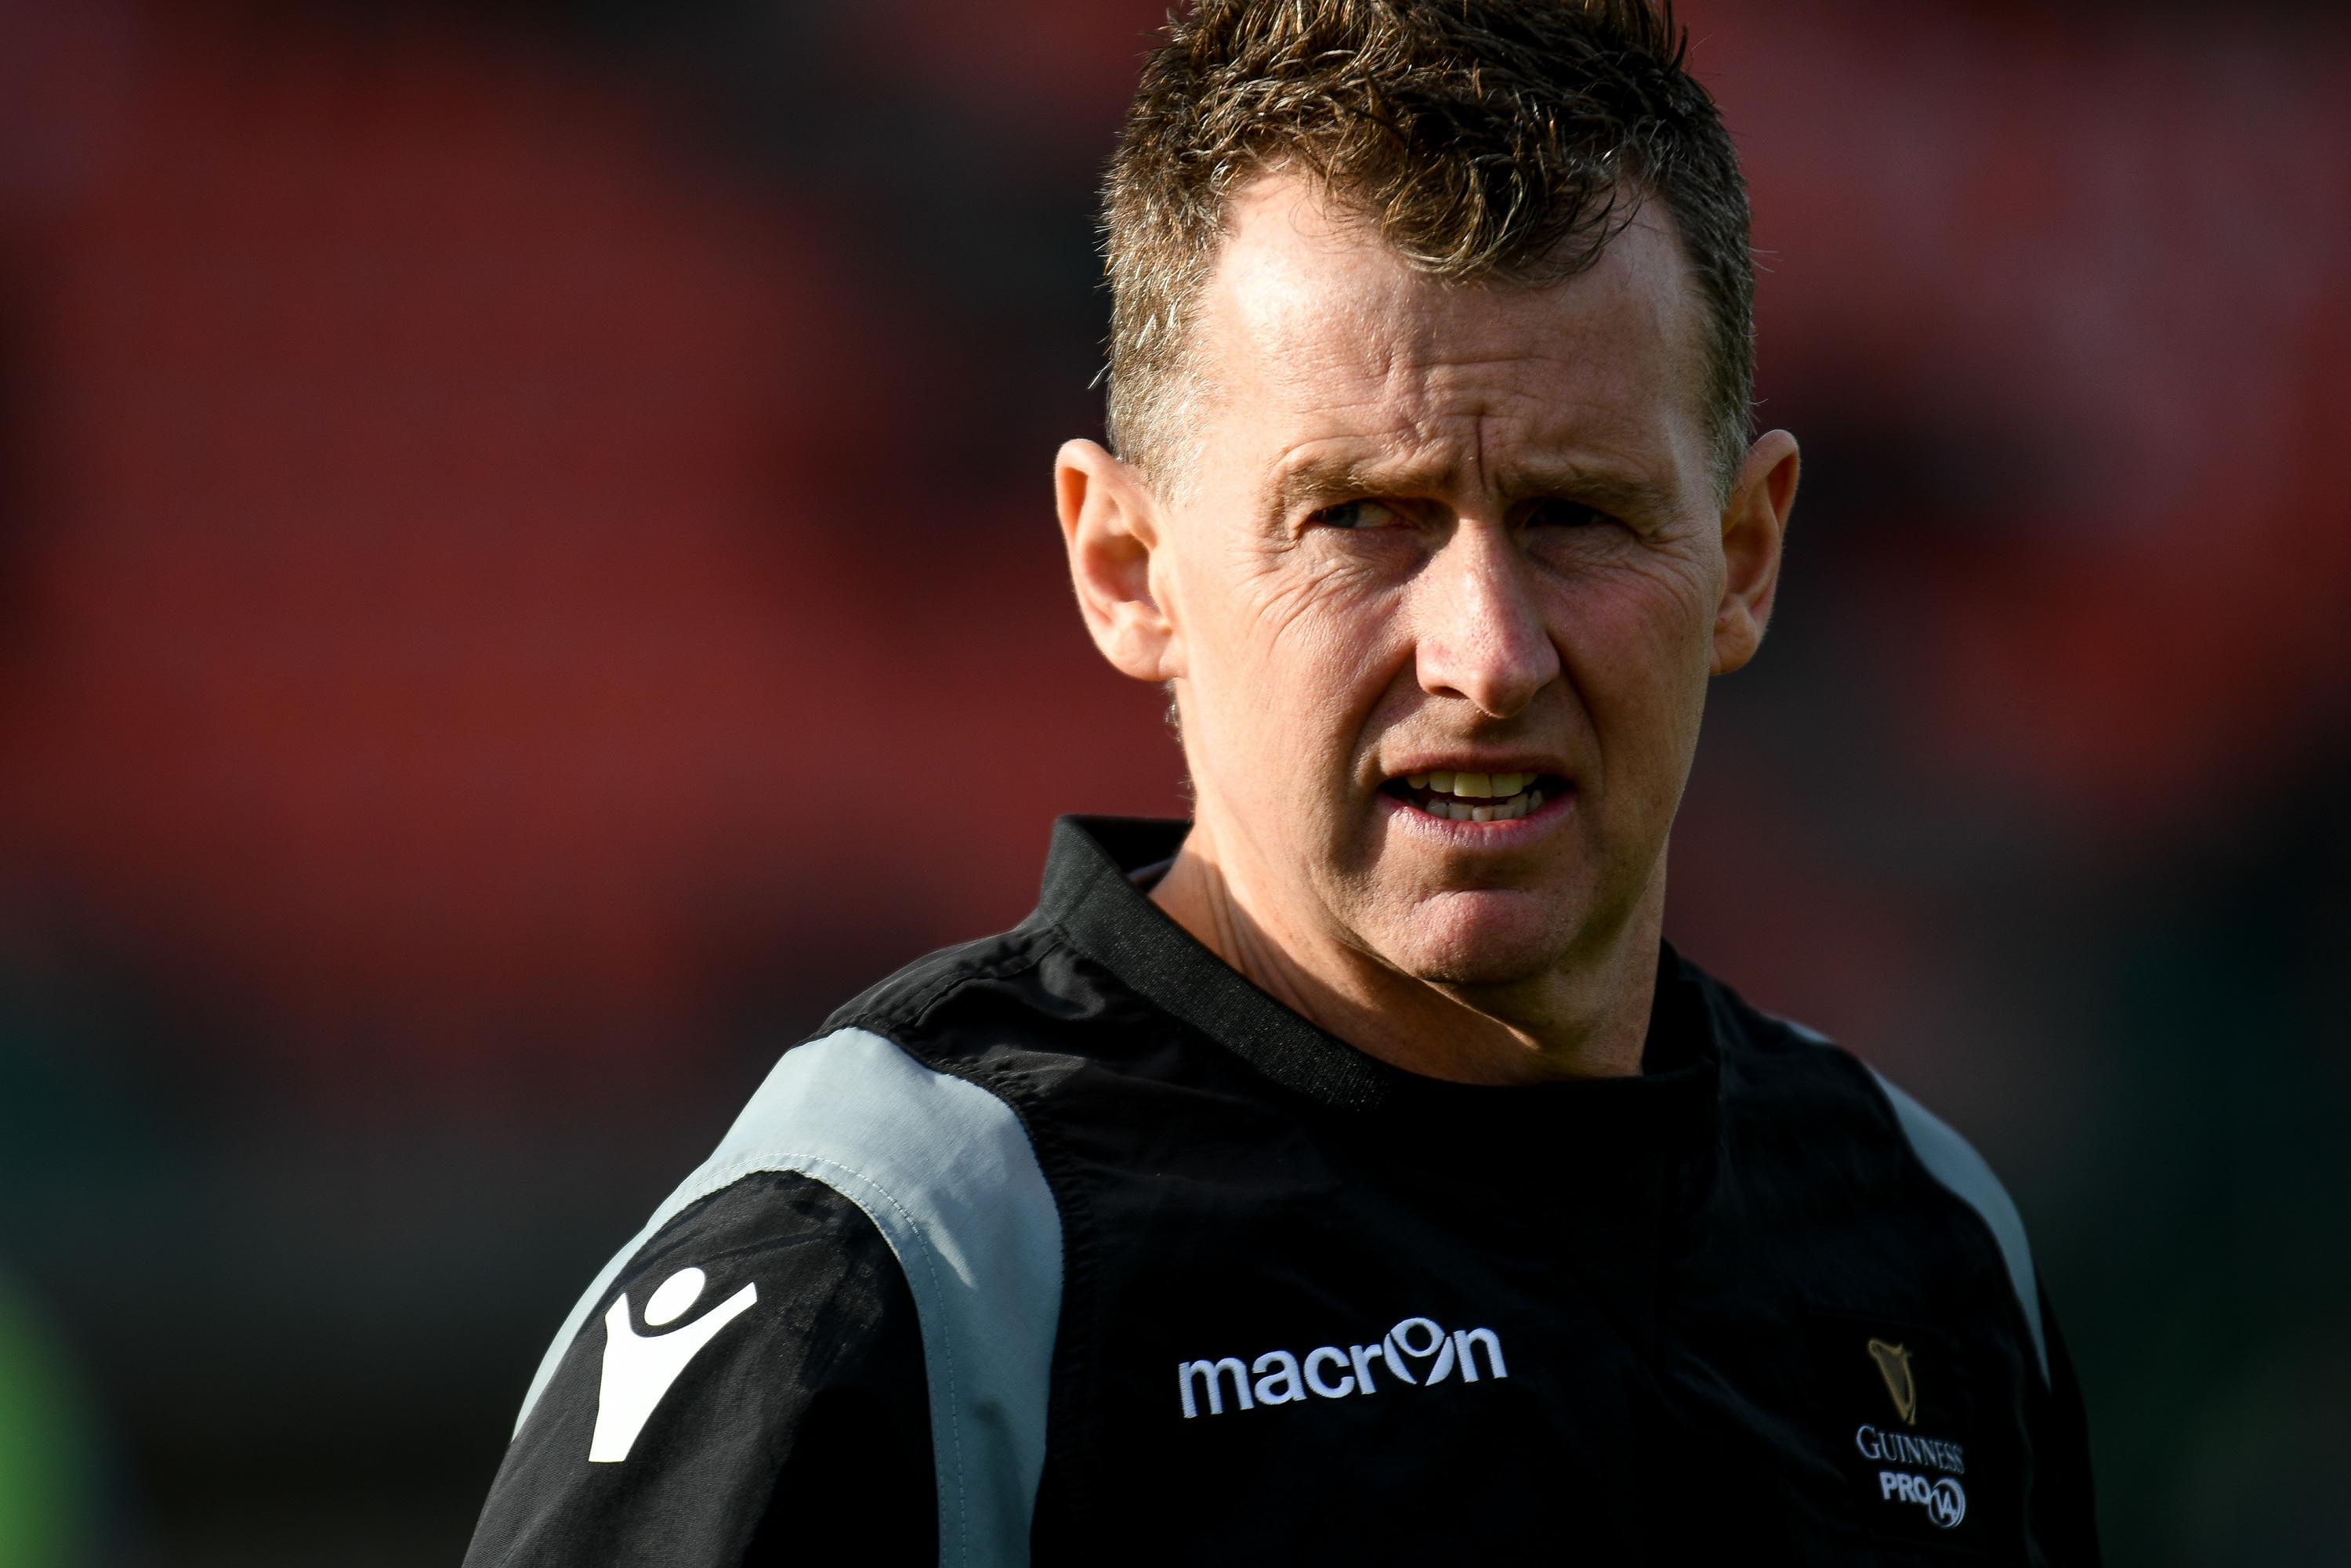 “When you start to fear for your safety and that of your family…”: former referee Nigel Owens sounds the alarm